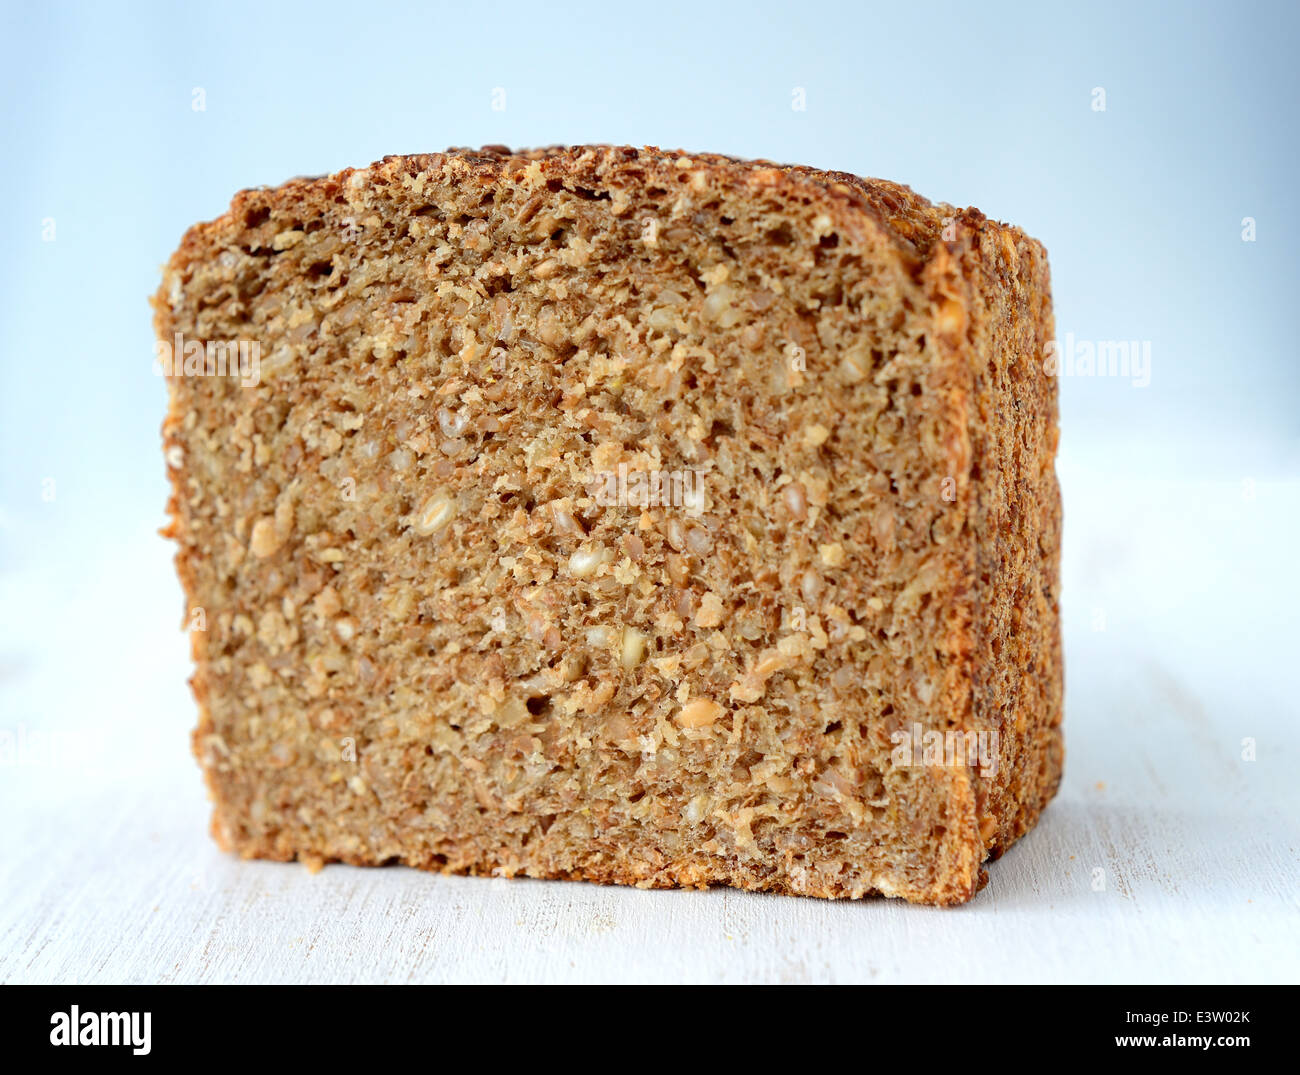 Slices of whole wheat bread. Stock Photo